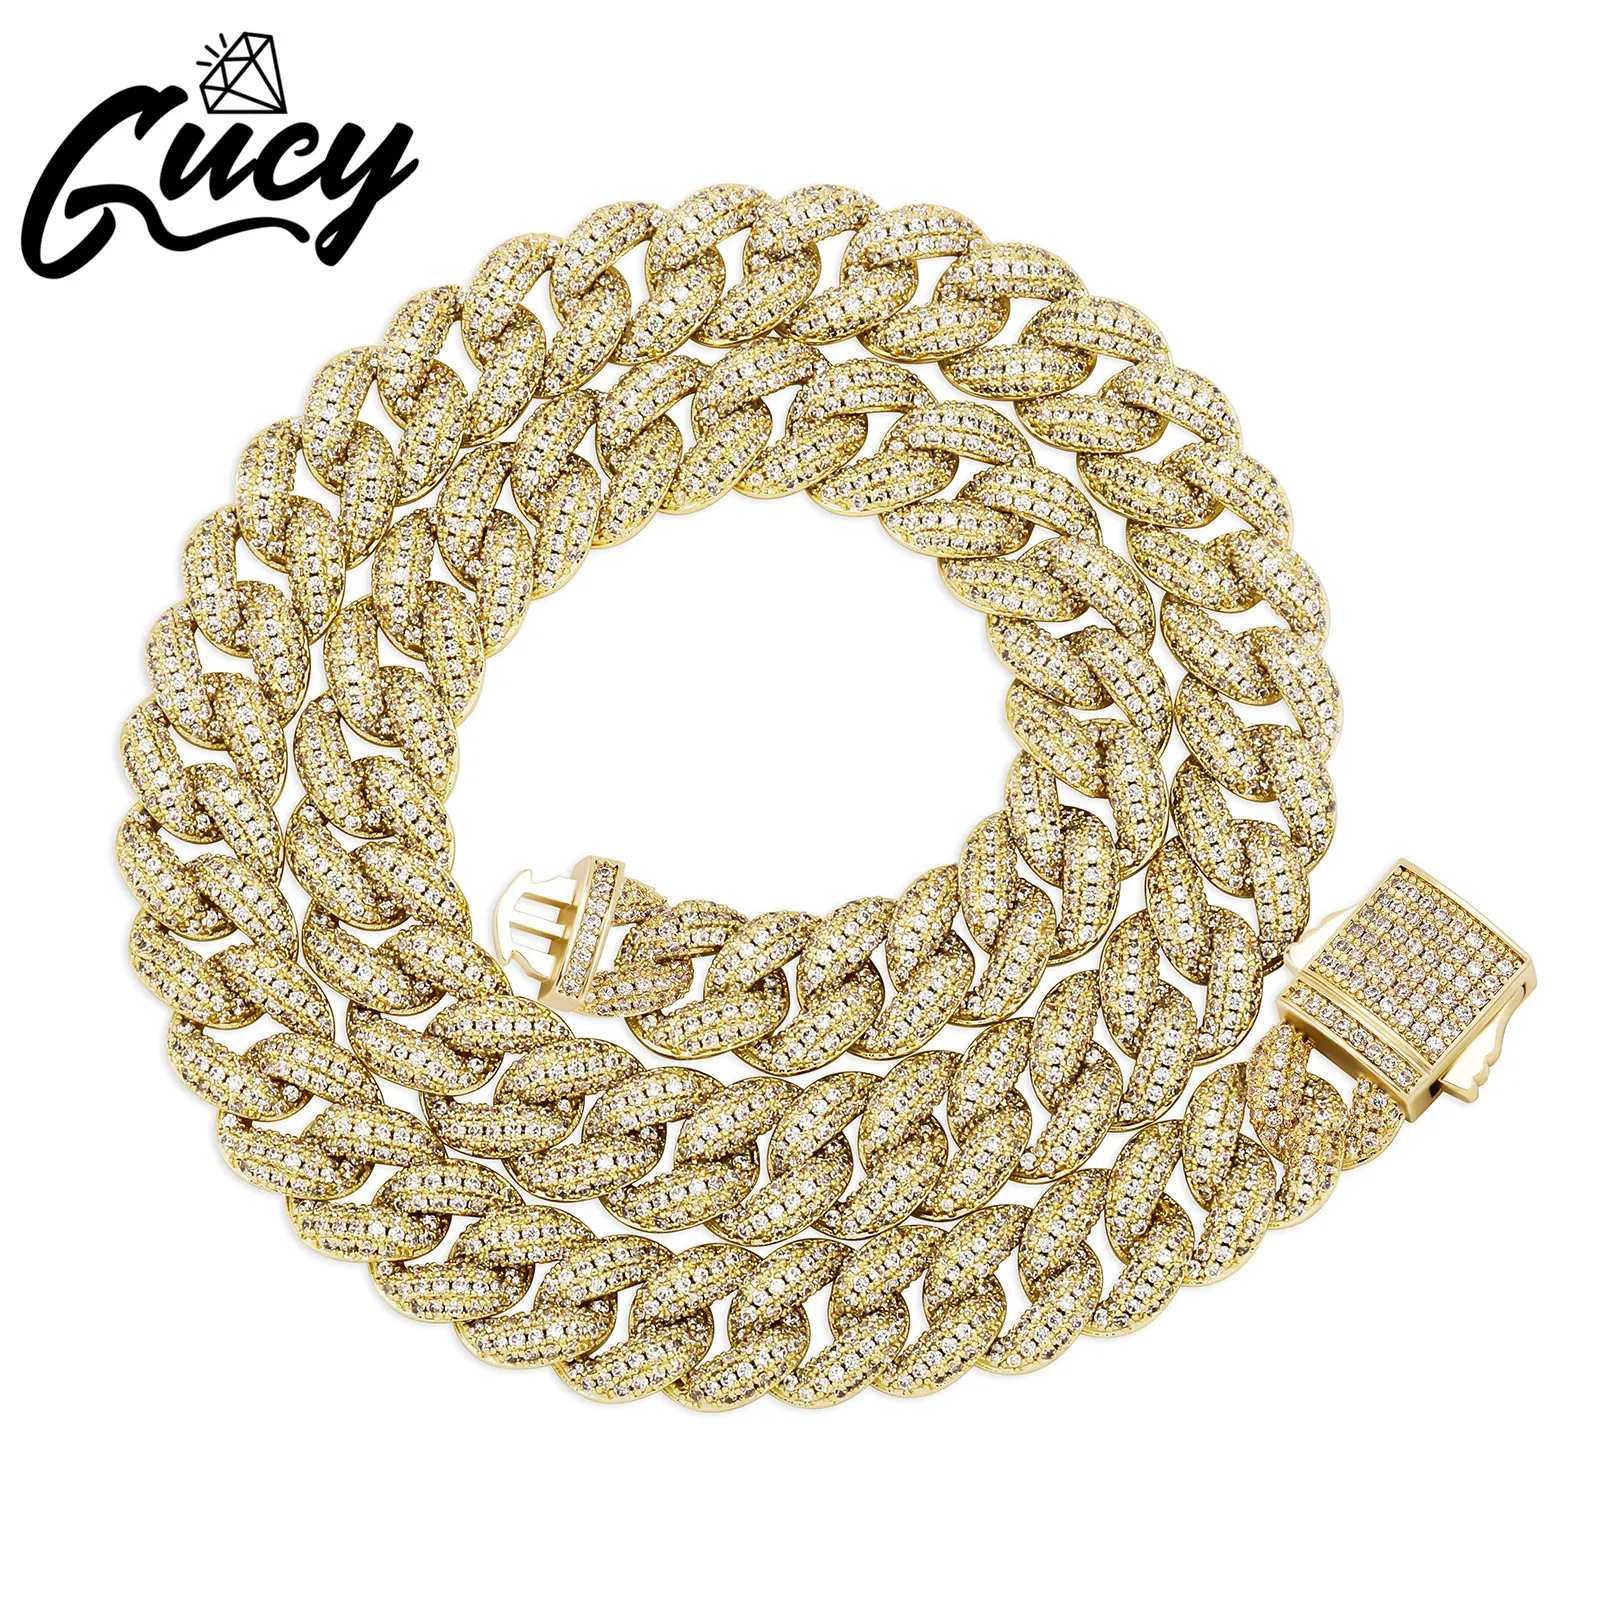 

GUCY Men Women Fashion Hip Hop Iced Out Bling Chain Necklace High quality 10mm Width Miami Cuban Chain Hip Hop Necklaces Jewelry